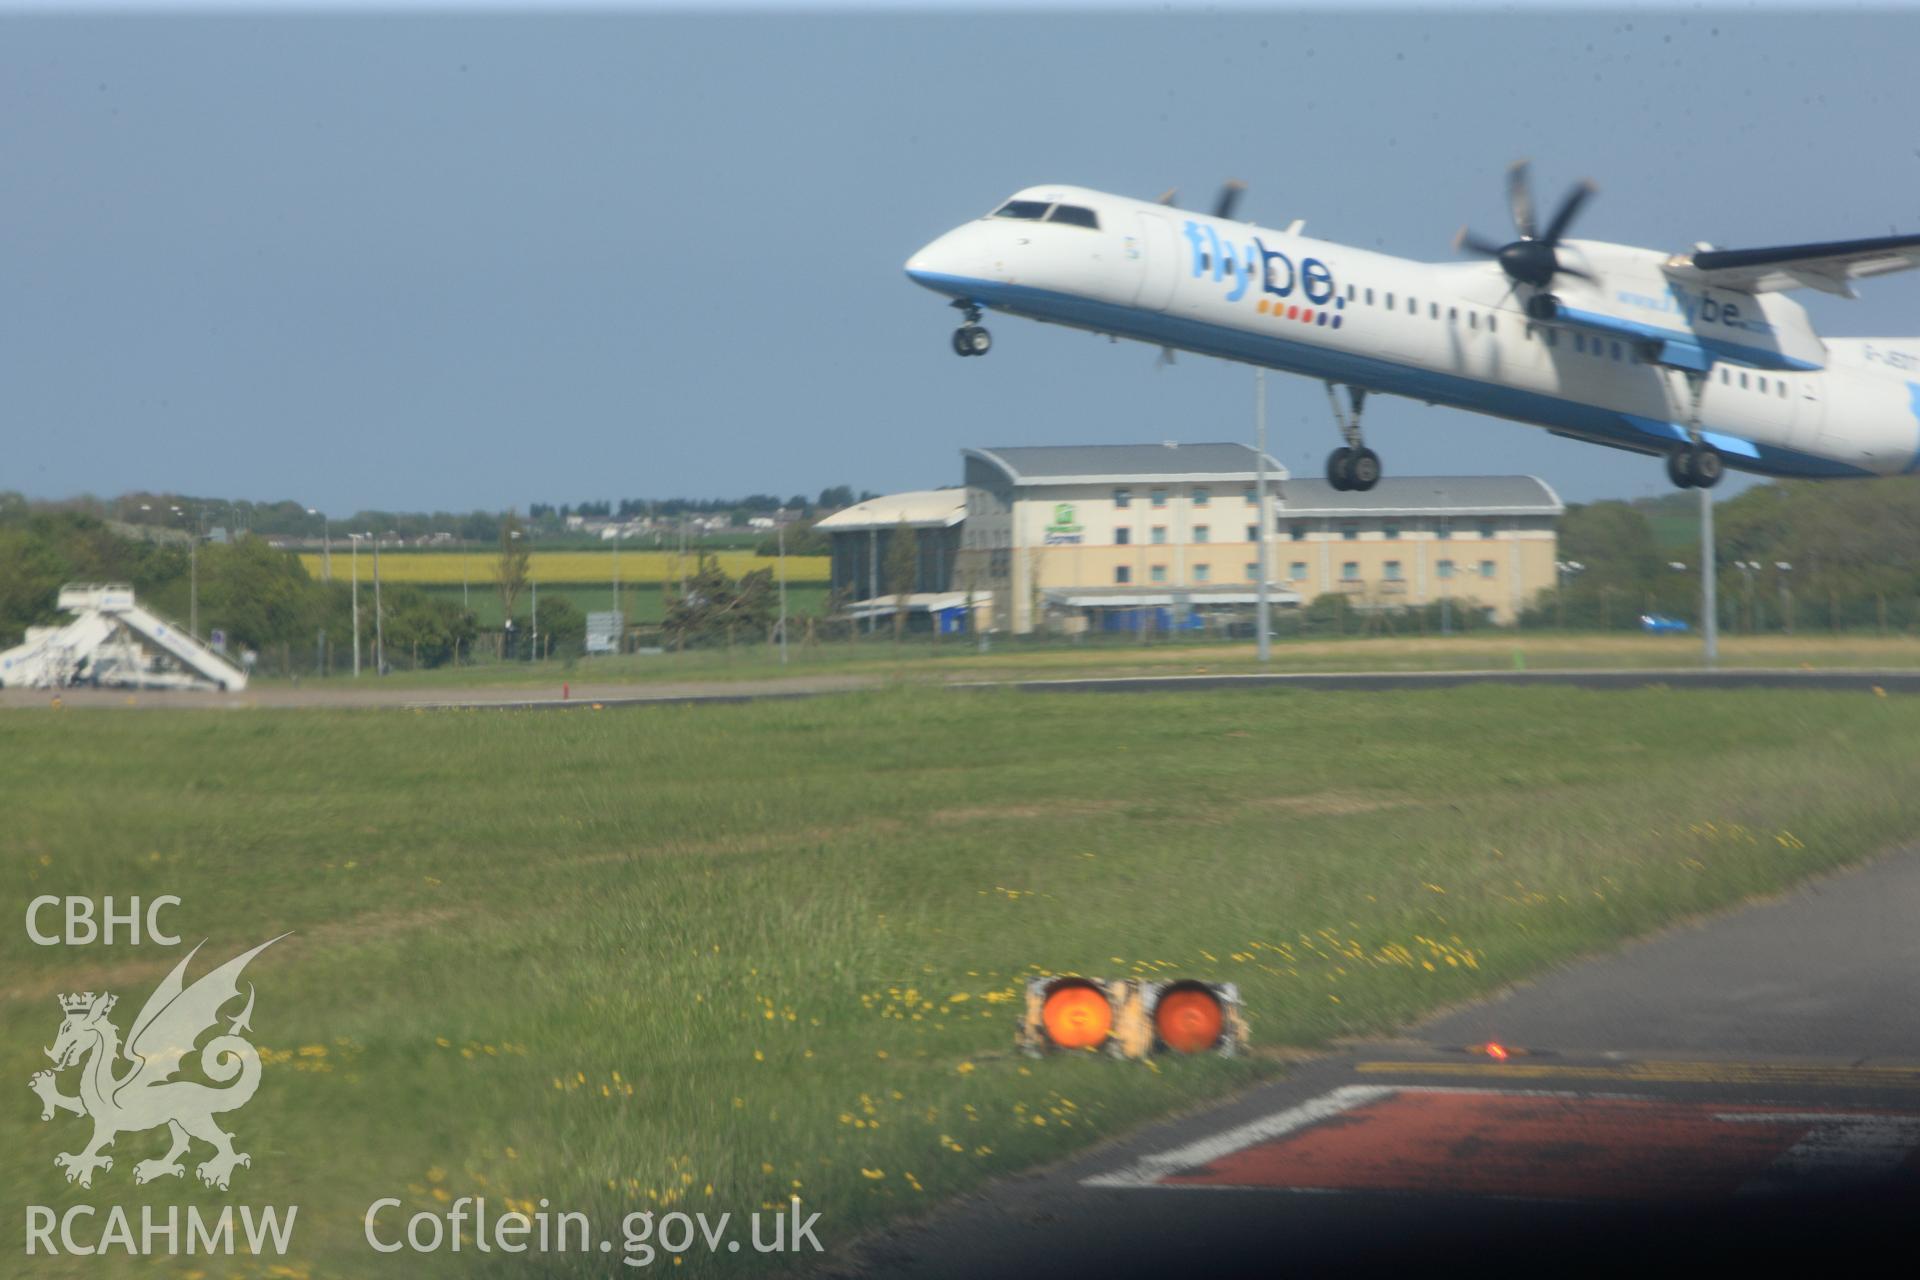 RCAHMW colour oblique photograph of Cardiff International Airport. Taken by Toby Driver on 22/05/2012.